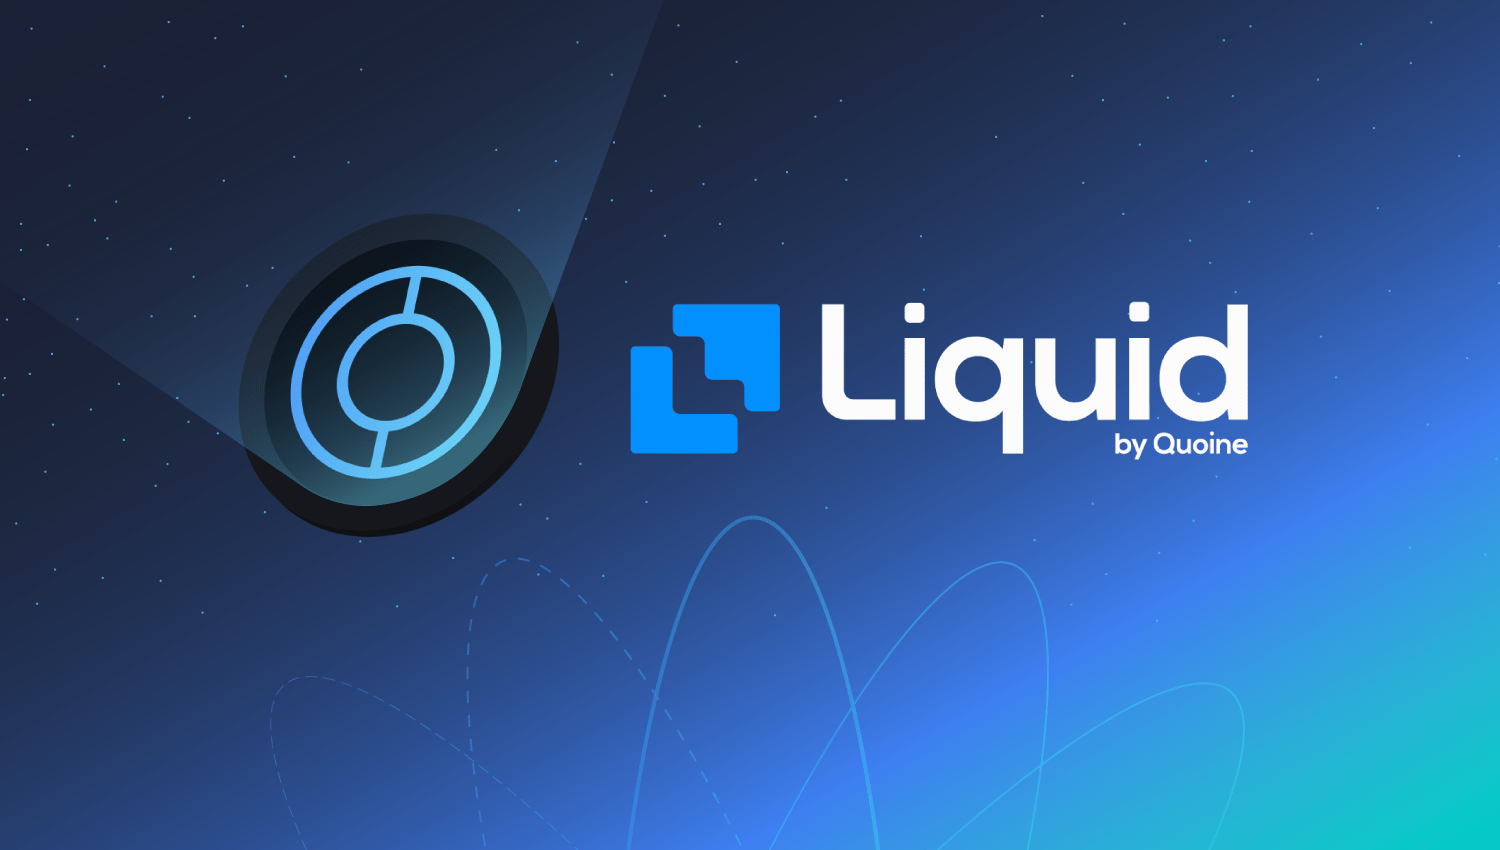 You can now buy CUDOS on Liquid!